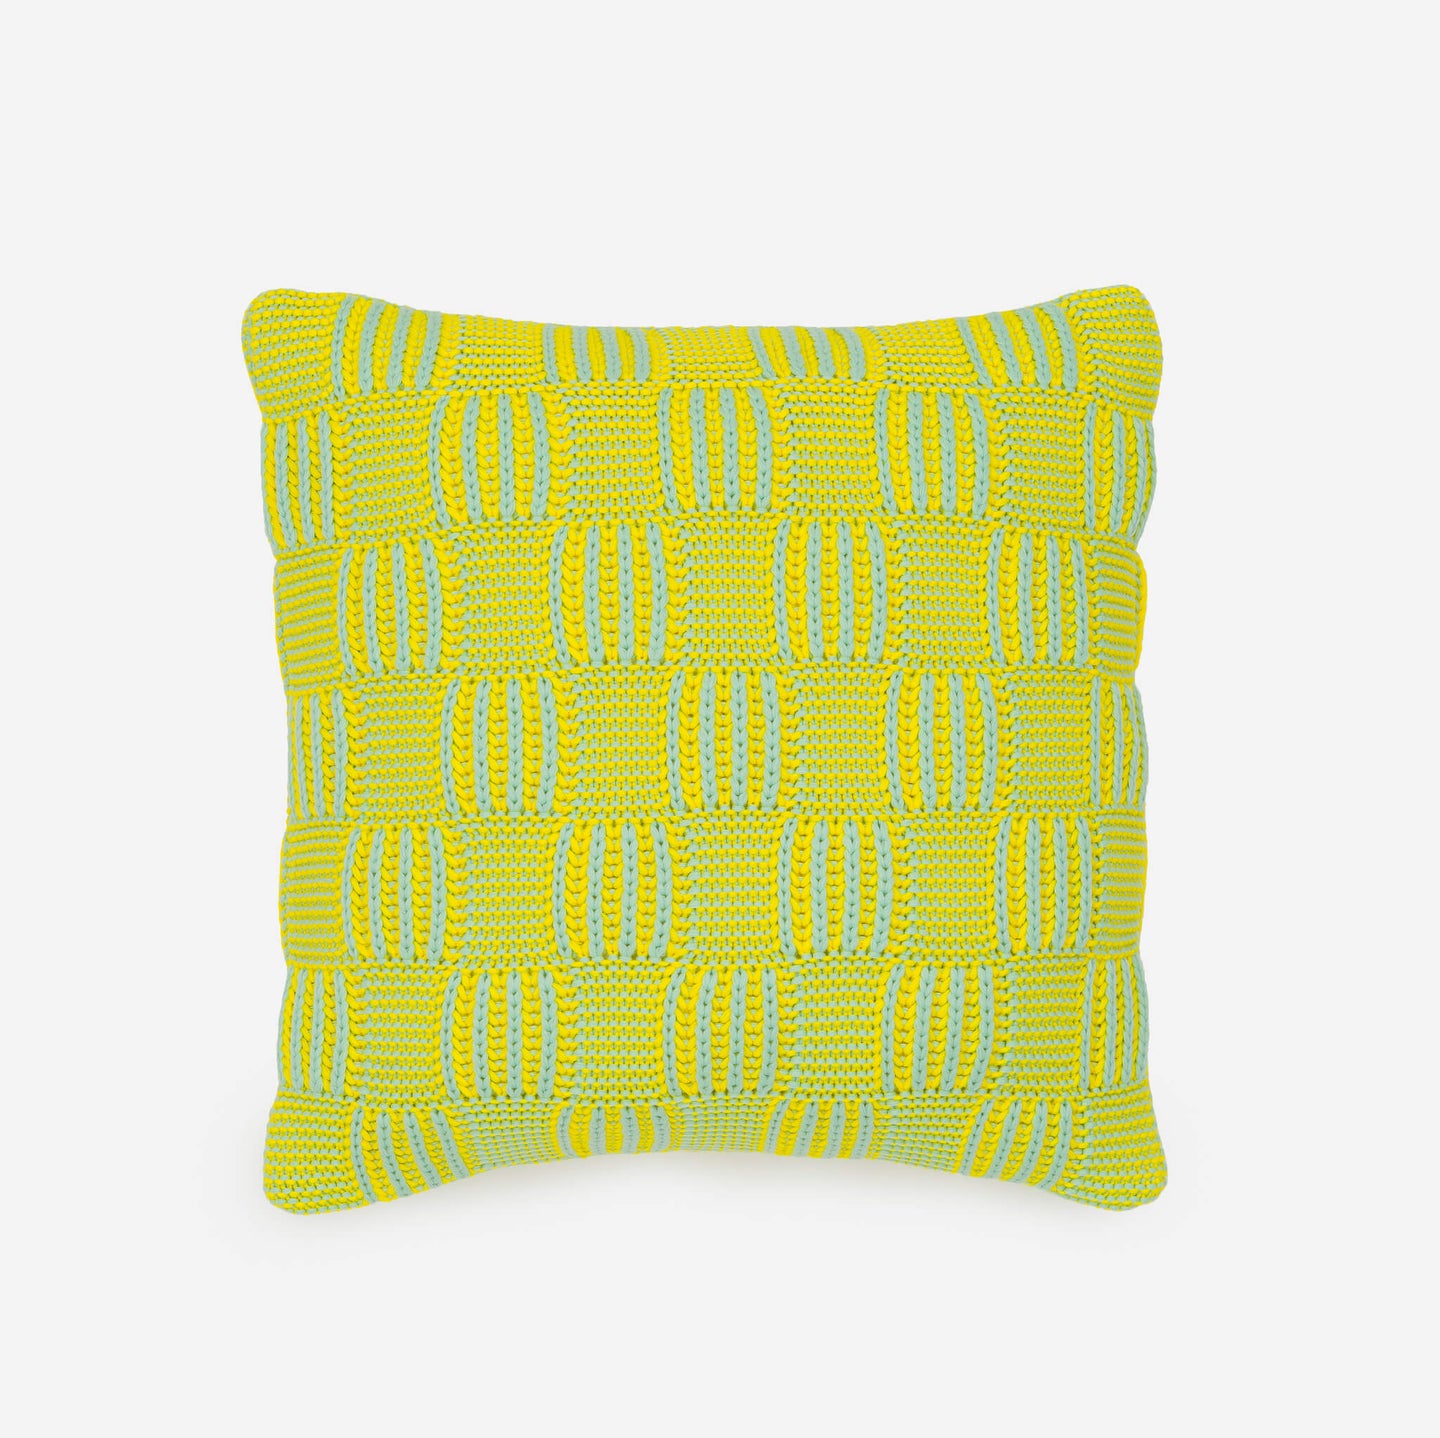 Chunky Checkerboard Pillow Cover Knit Texture Graphic Effect